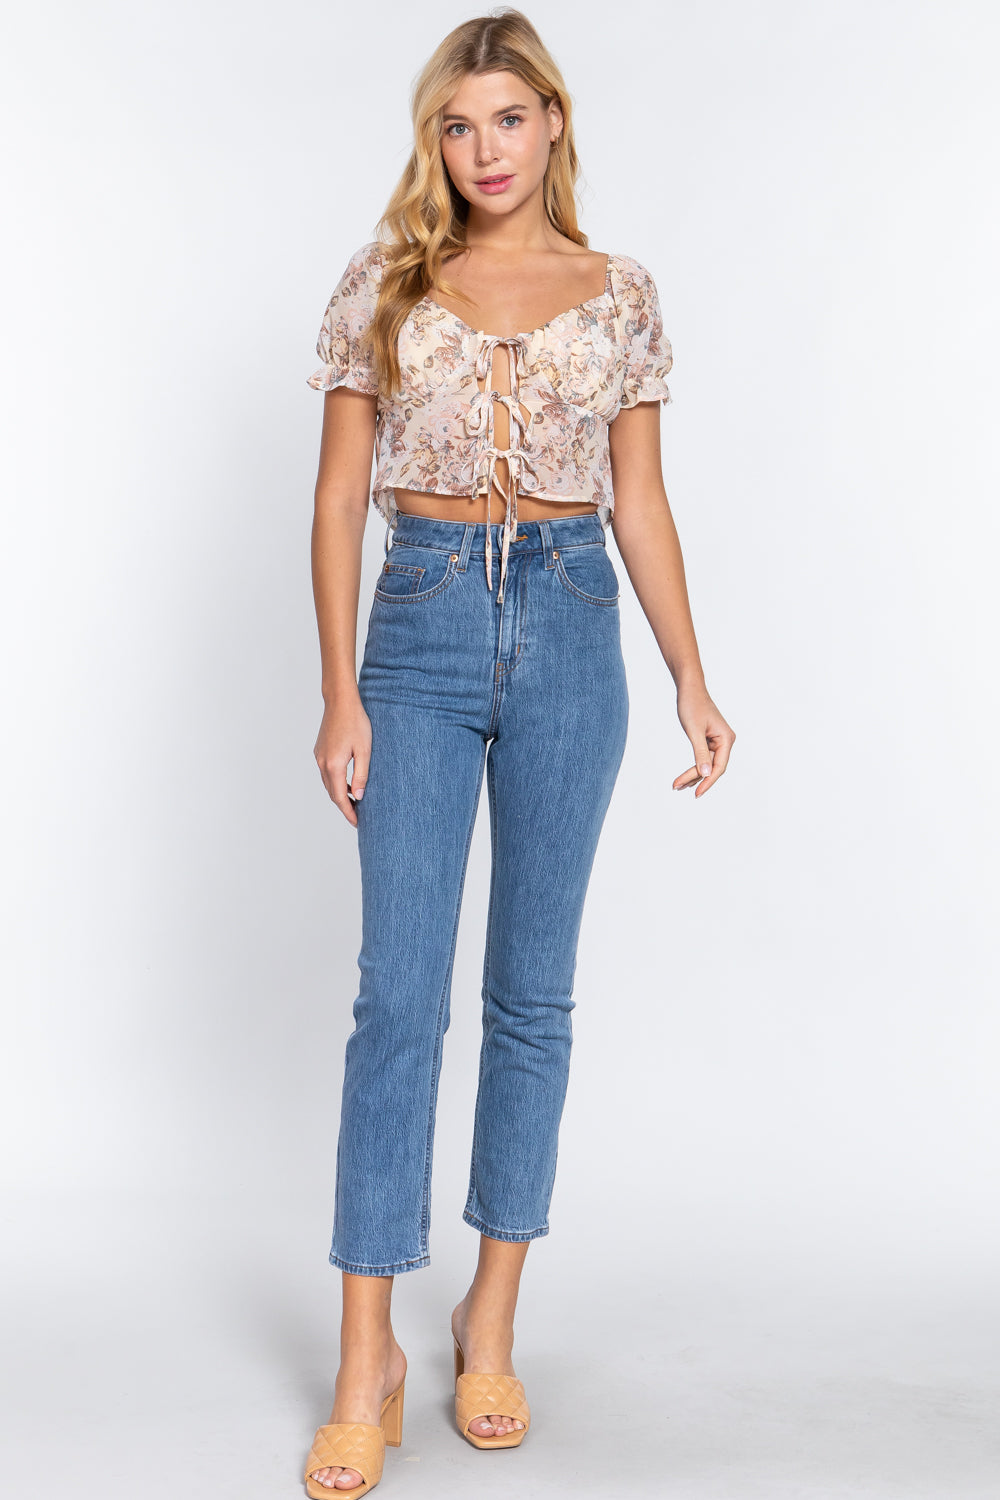 Flower Printed Woven Front Tie Top